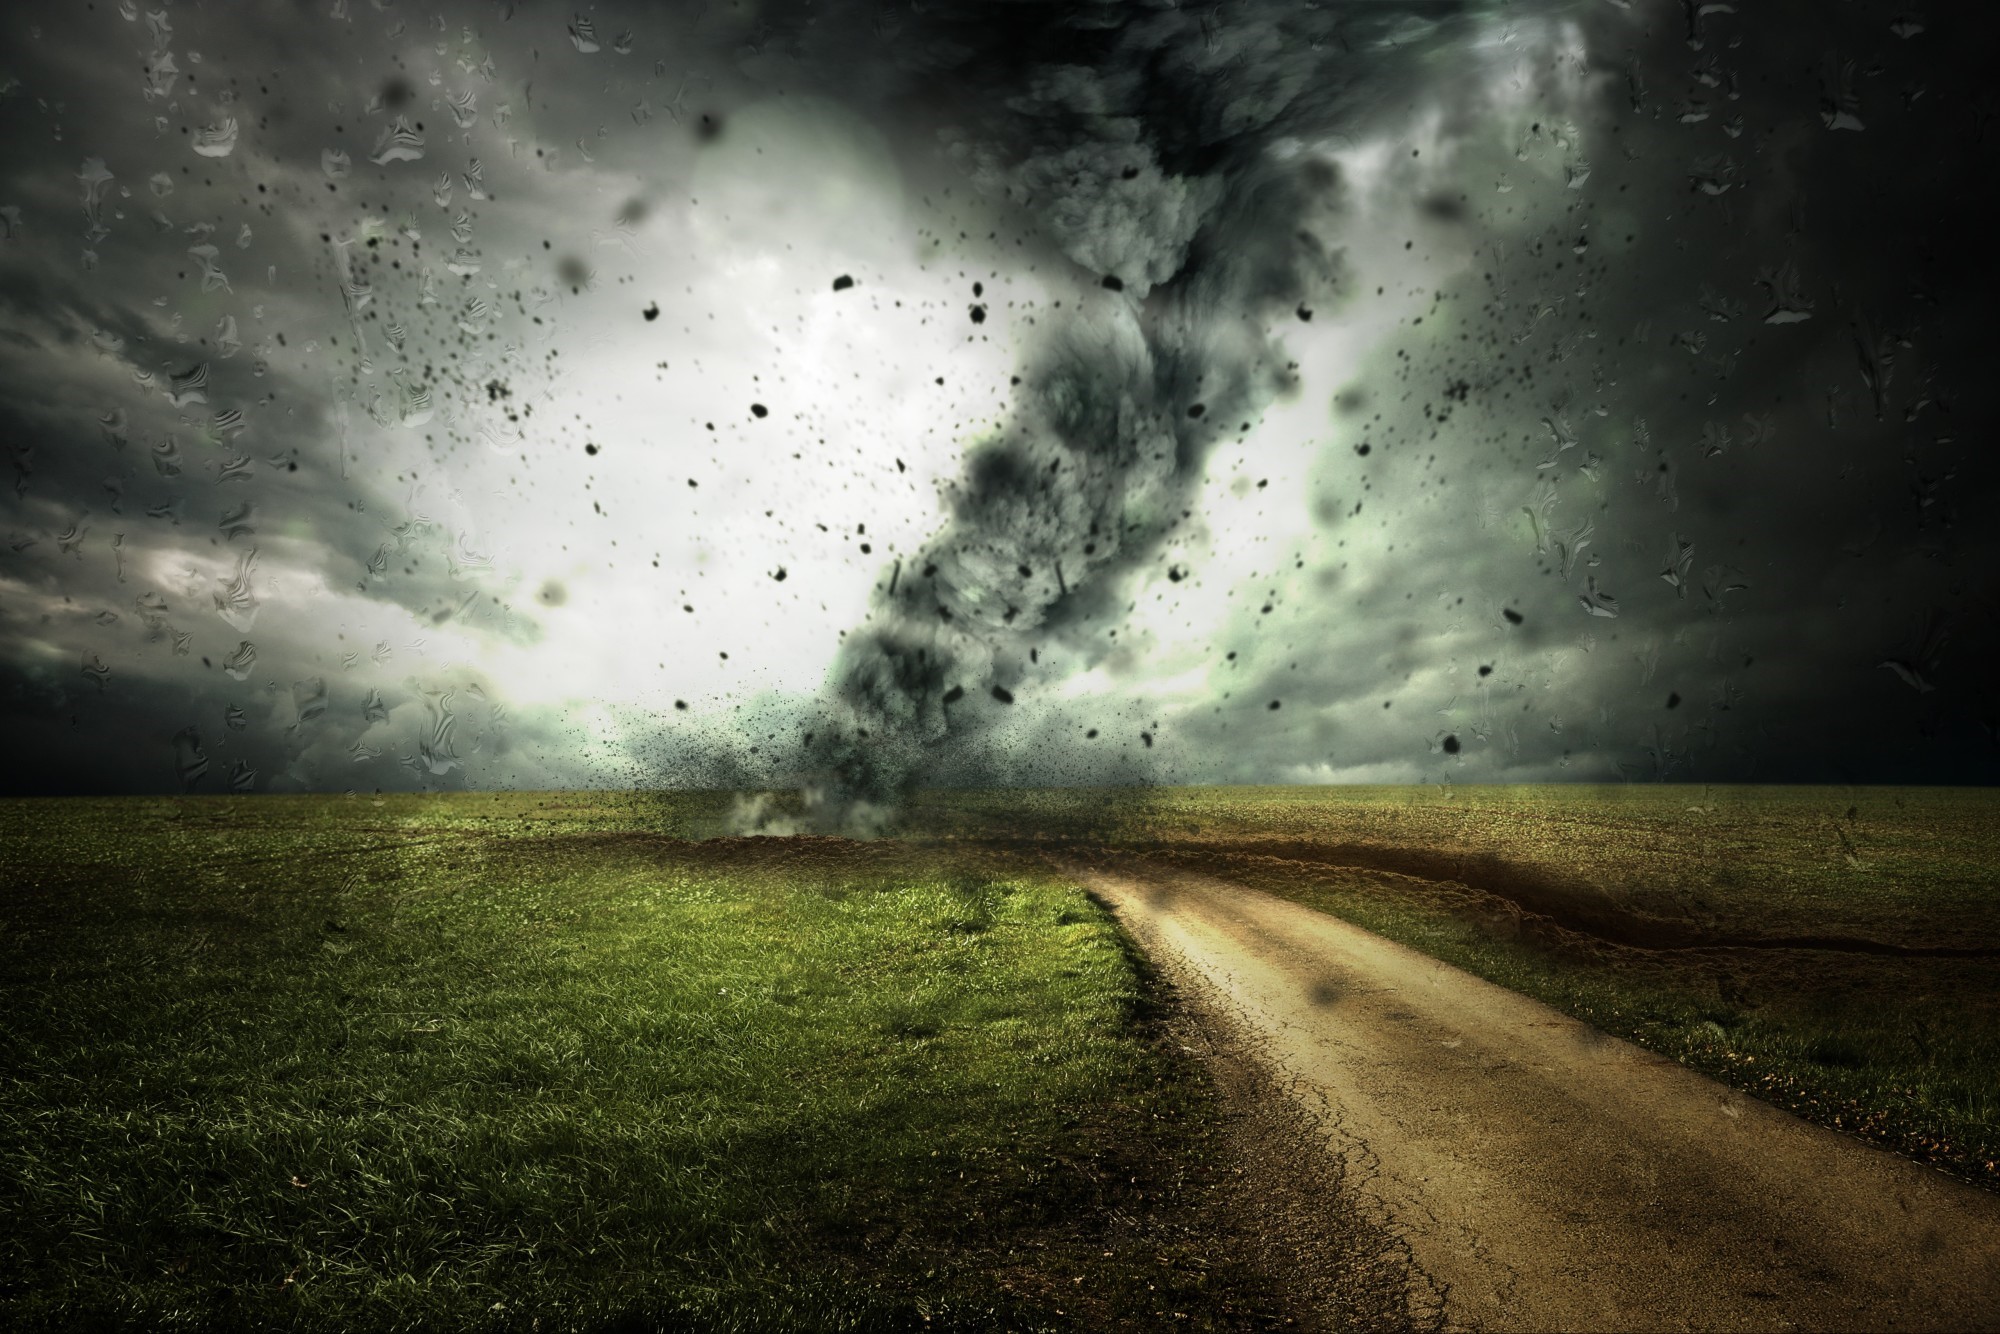 Tornado Safety Tips to Remember in an Emergency